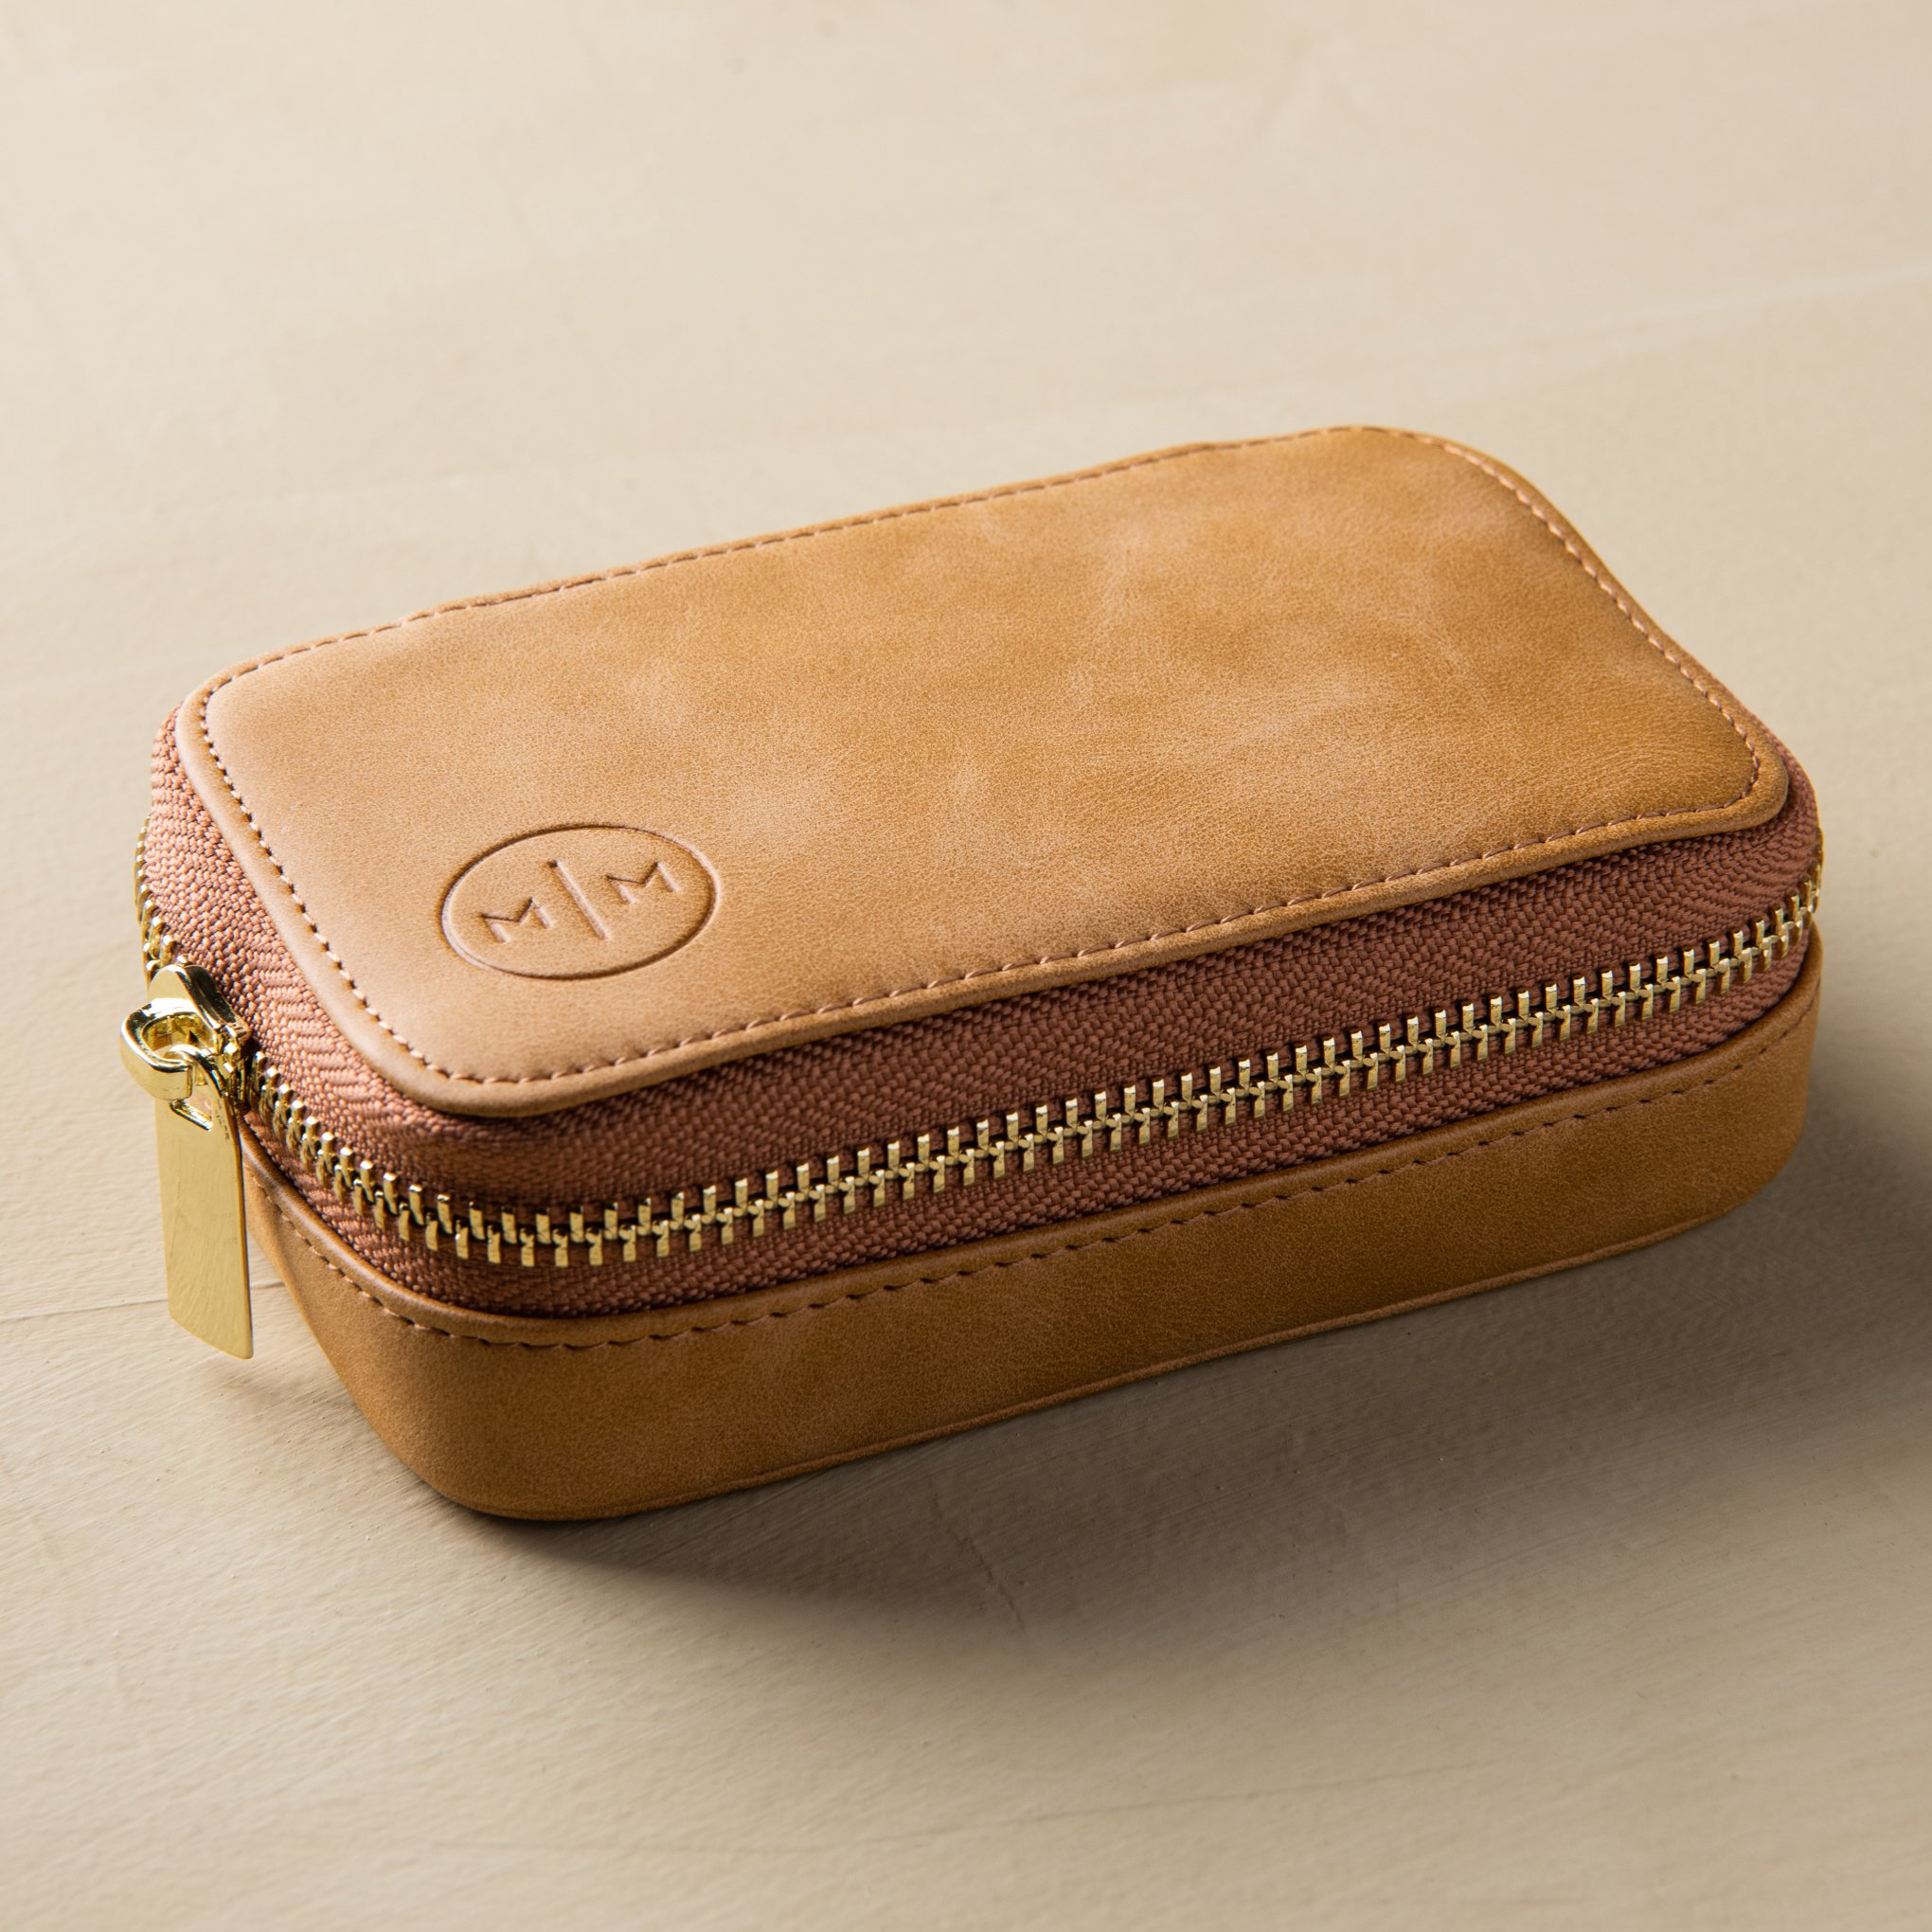 light brown leather zip-up portable jewelry case